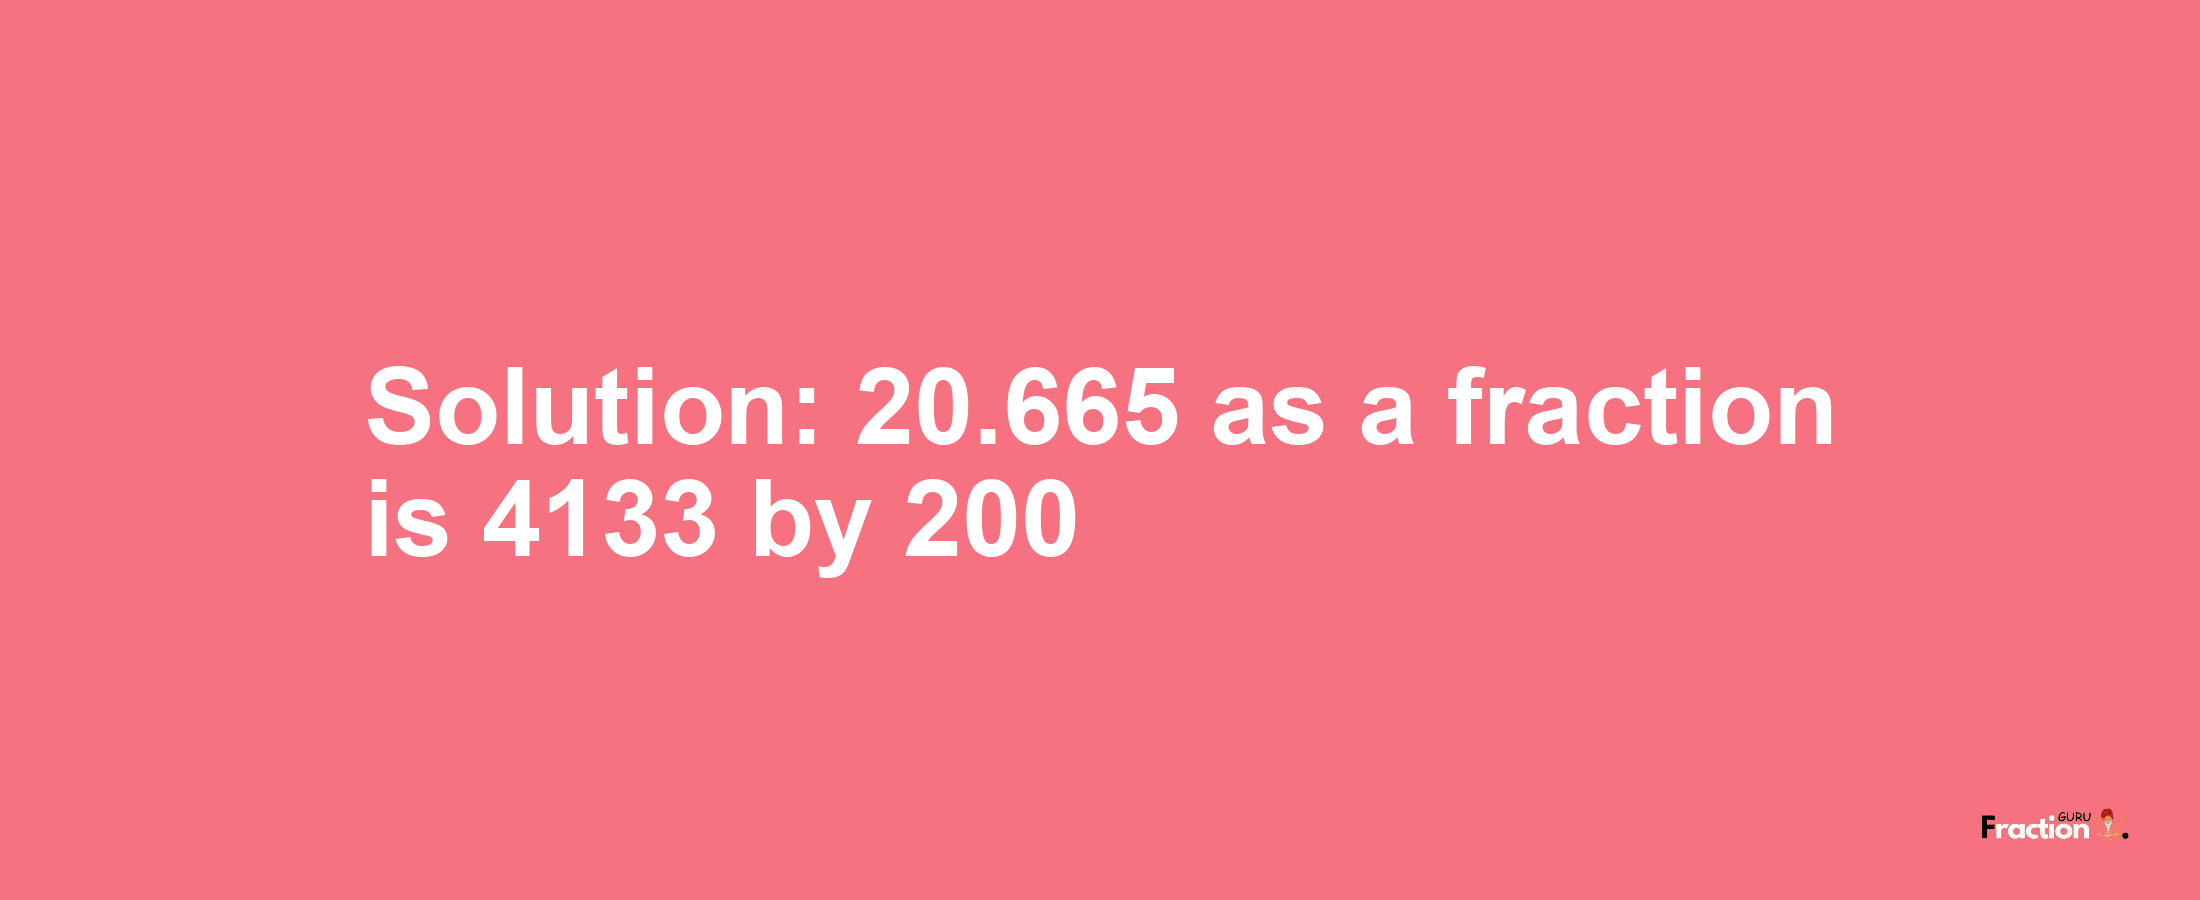 Solution:20.665 as a fraction is 4133/200